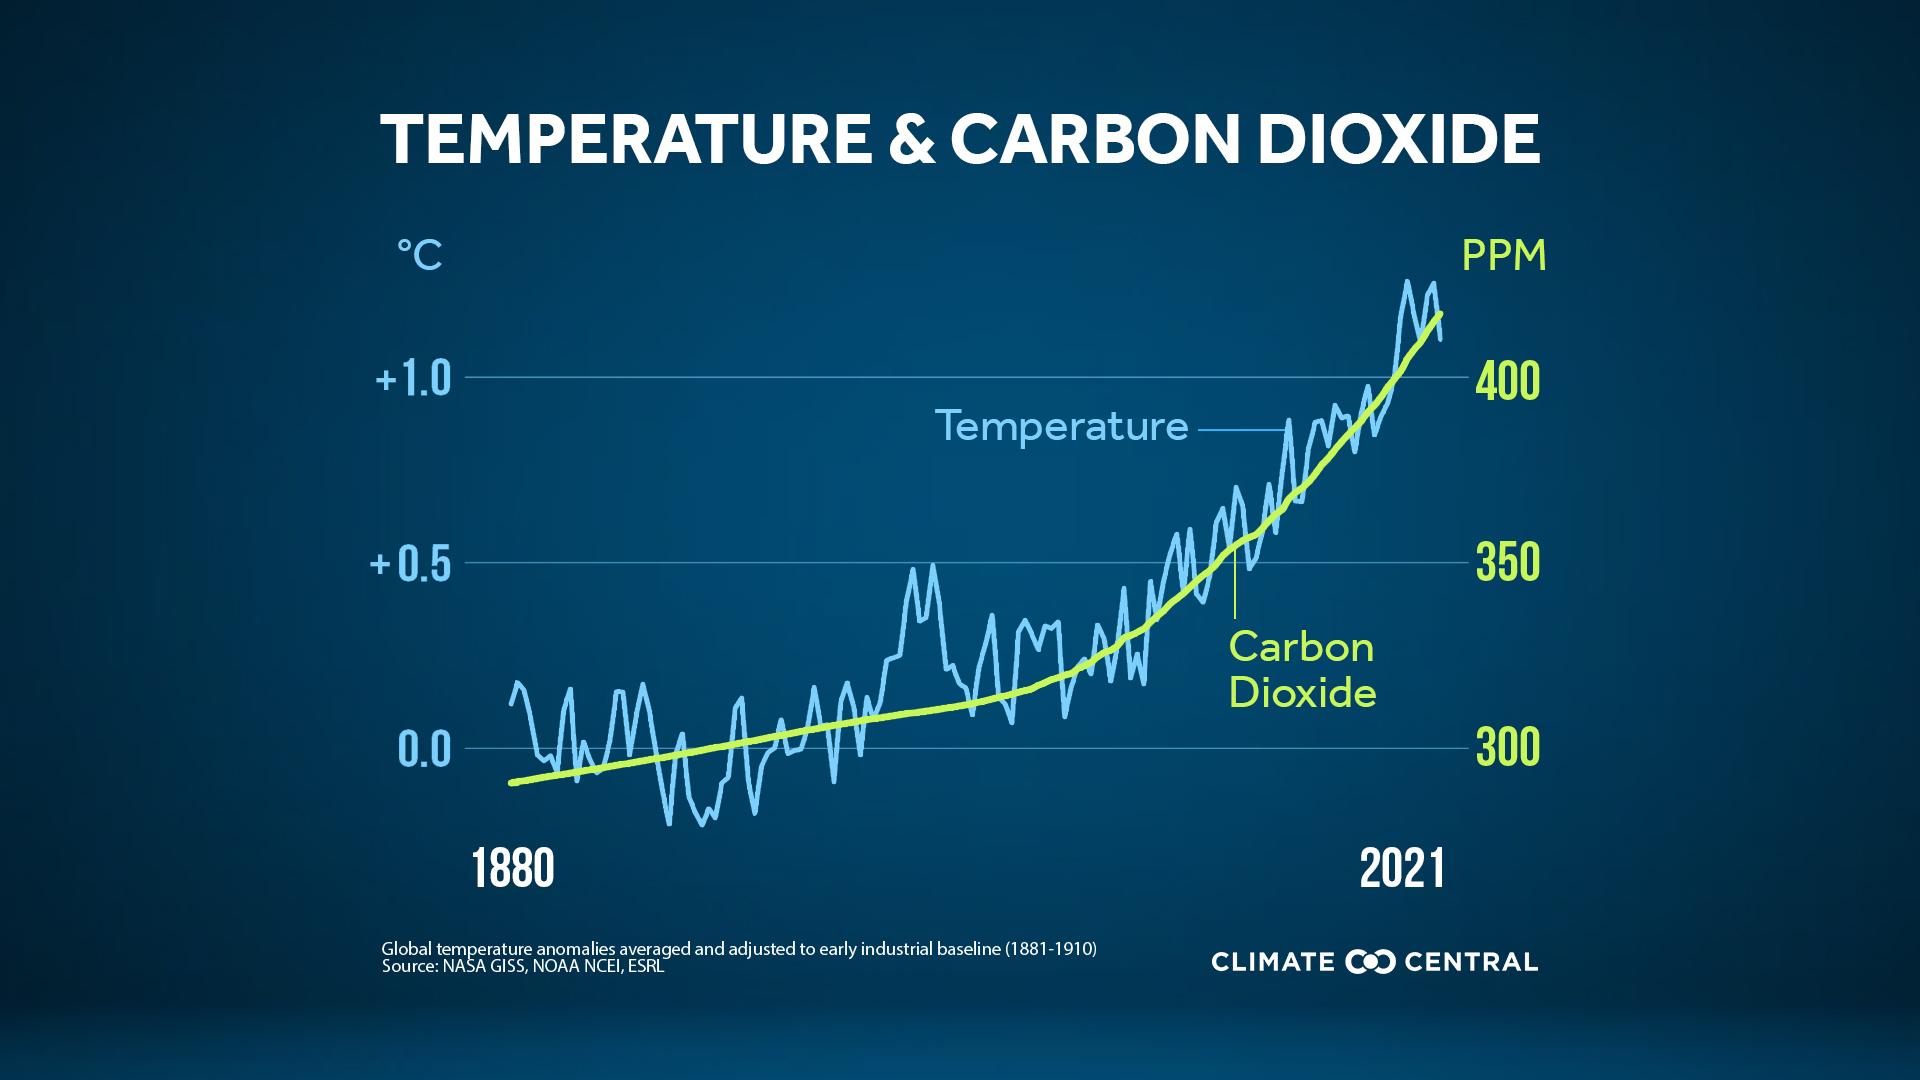 Annual CO2 Peak and Temperature - Peak CO2 & Heat-trapping Emissions